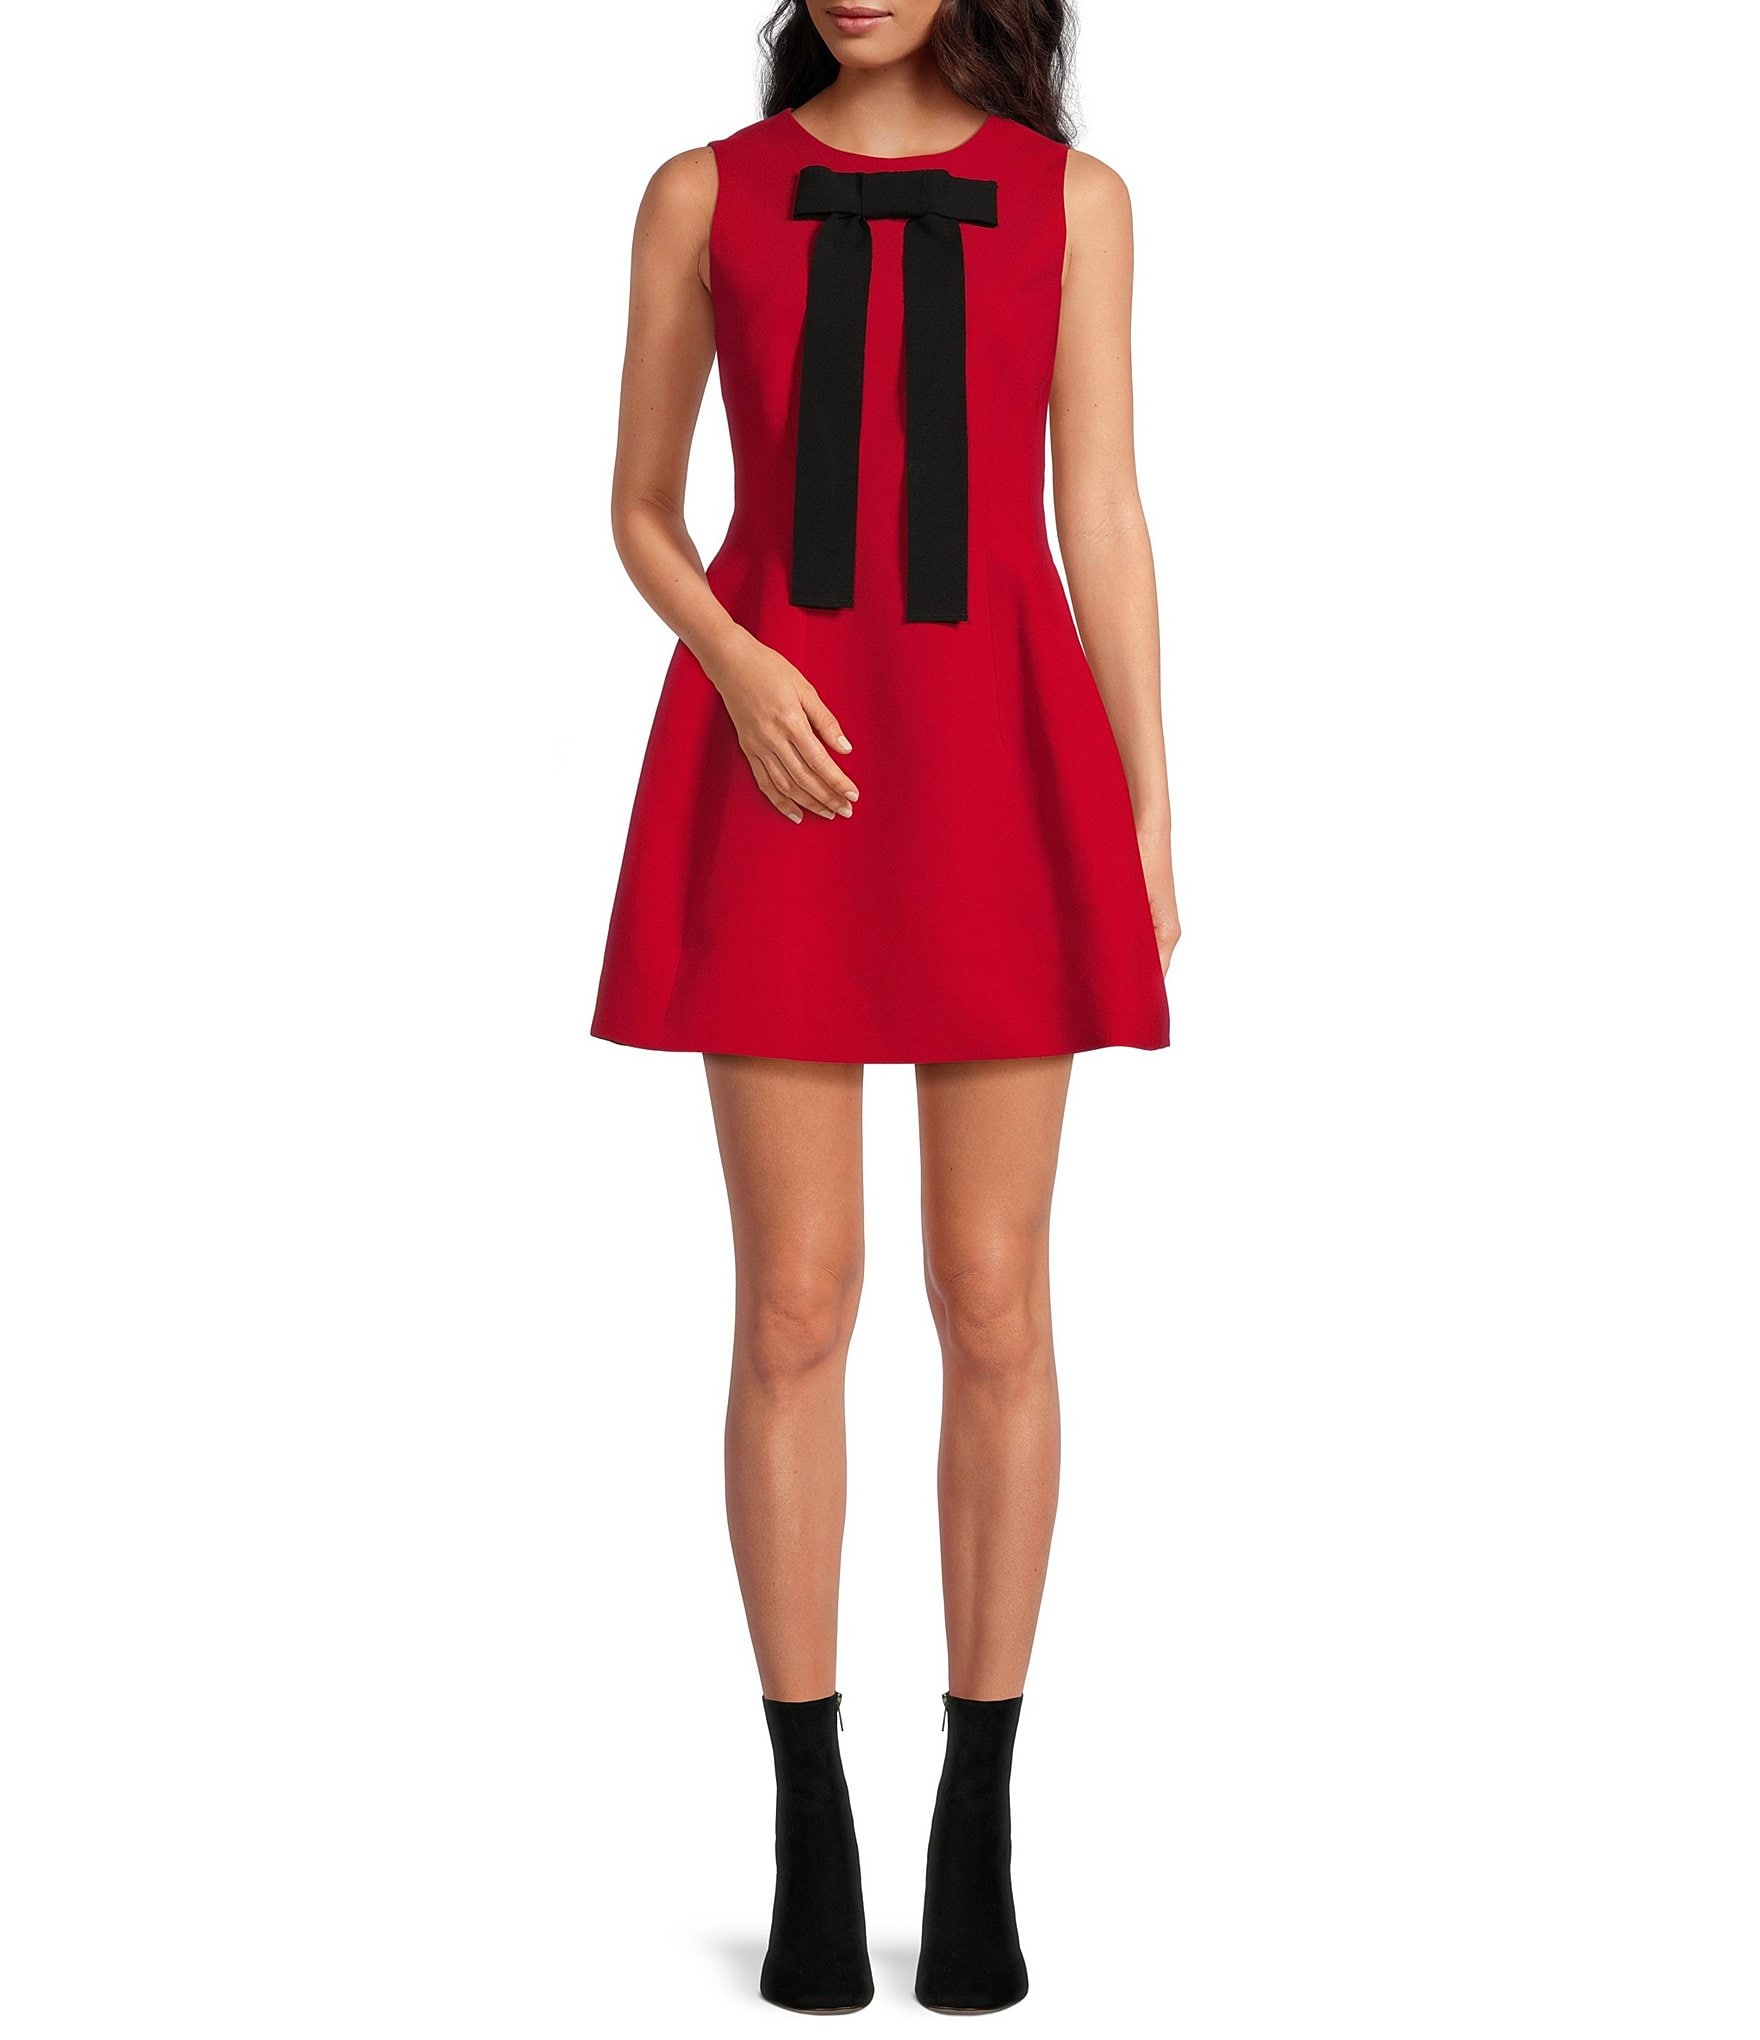 https://dimg.dillards.com/is/image/DillardsZoom/zoom/a-loves-a-front-bow-detail-sleeveless-a-line-mini-dress/00000000_zi_d8b36d30-9e50-45ef-a3d6-a408e2a27a29.jpg